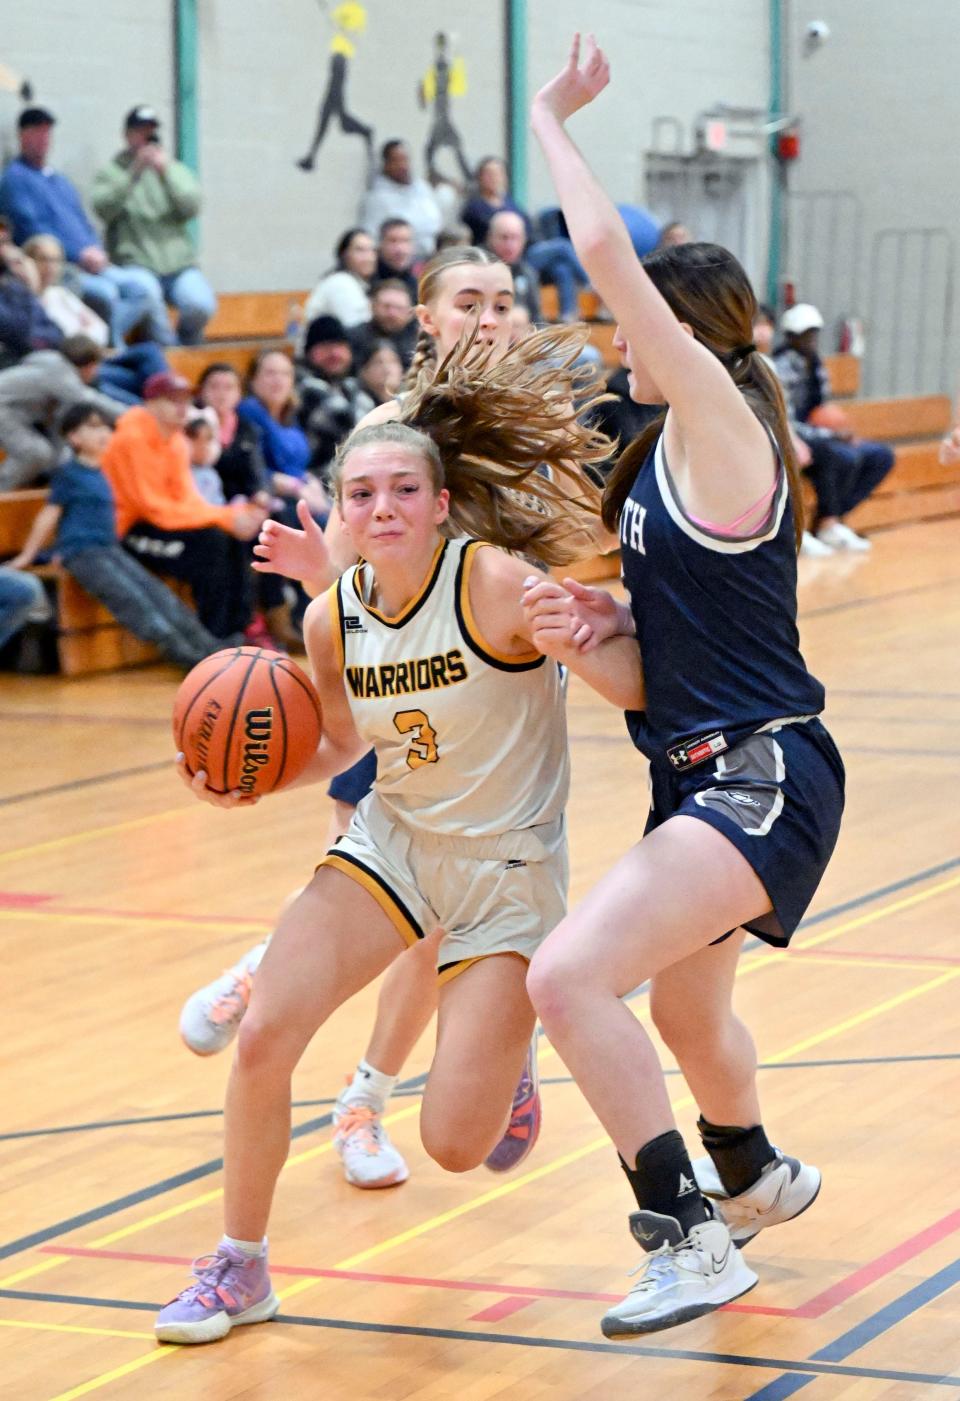 Jordyn Streitmatter of Nauset drives the lane against Lila Connolly of Plymouth North.